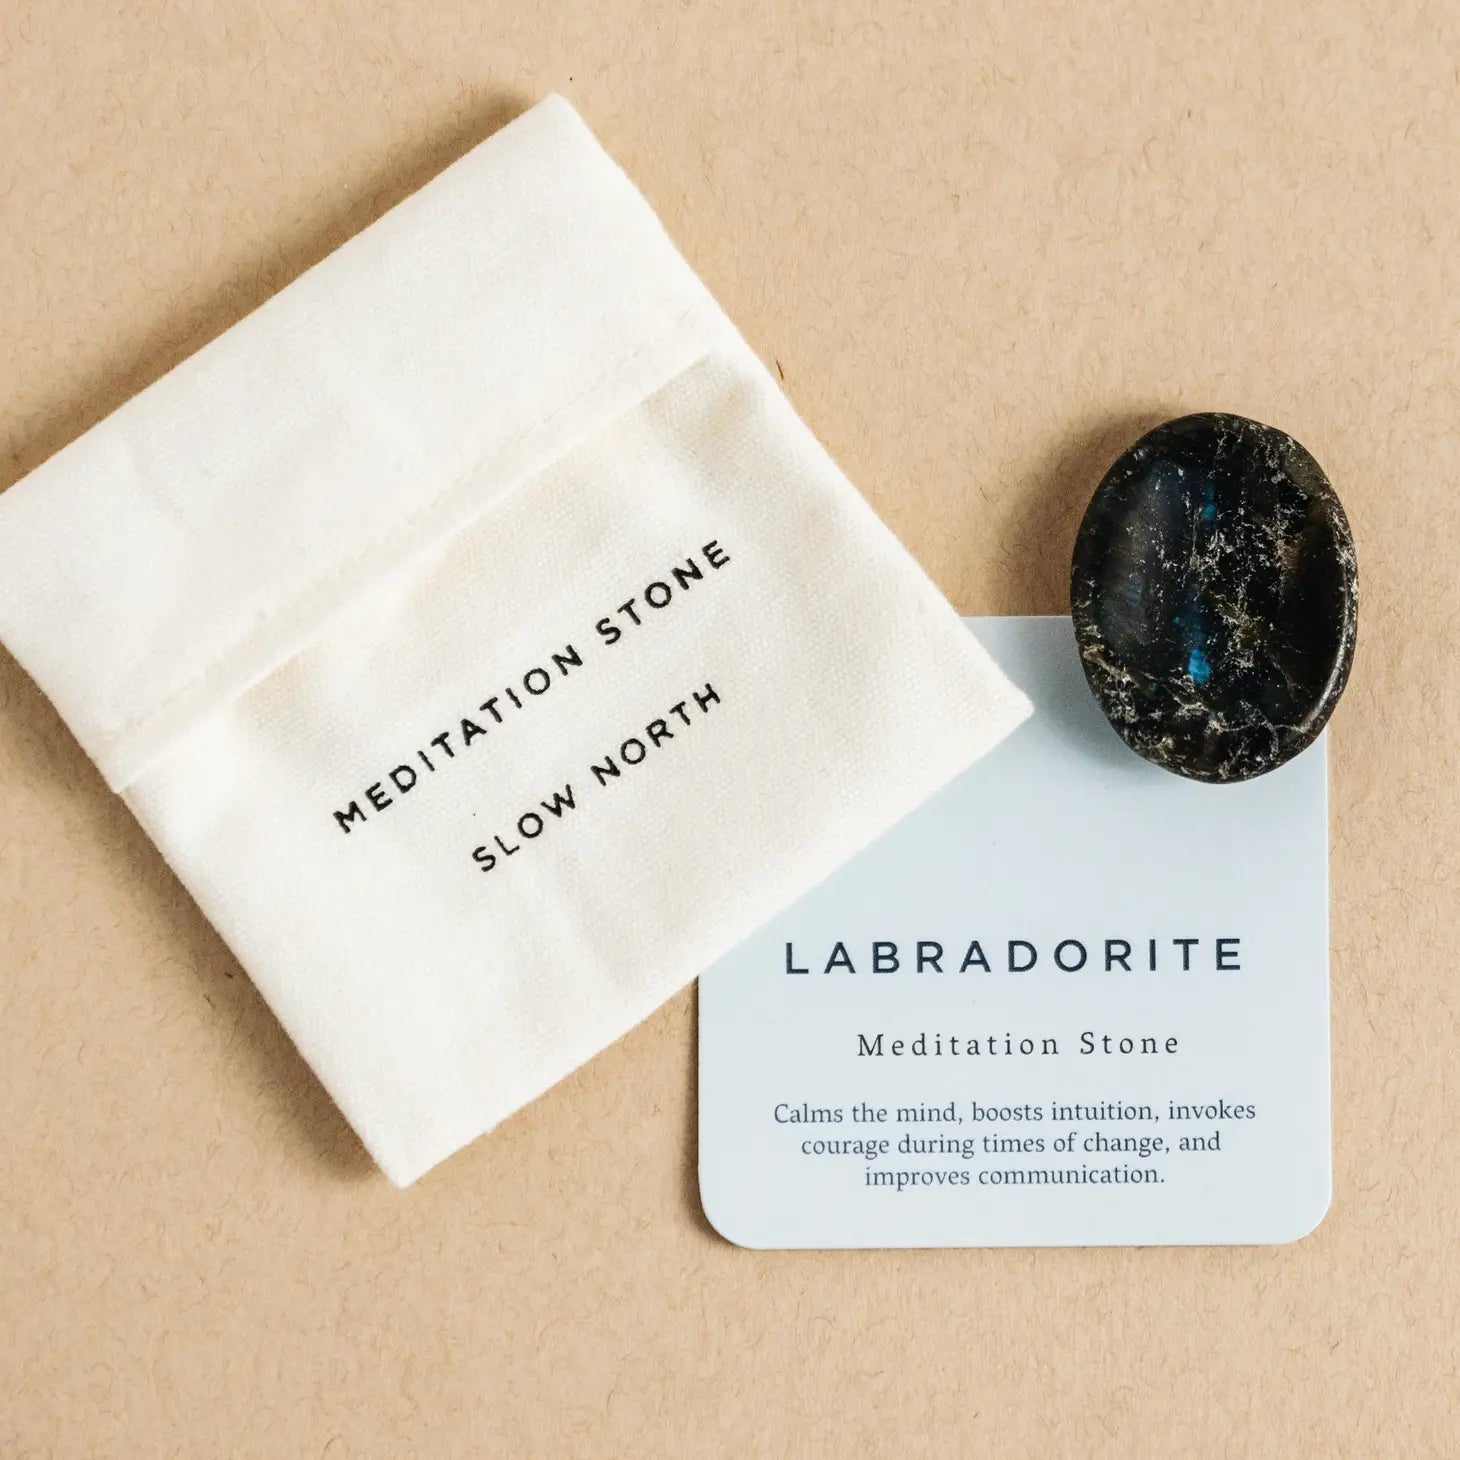 Slow North Labradorite - Meditation Stone available at The Good Life Boutique